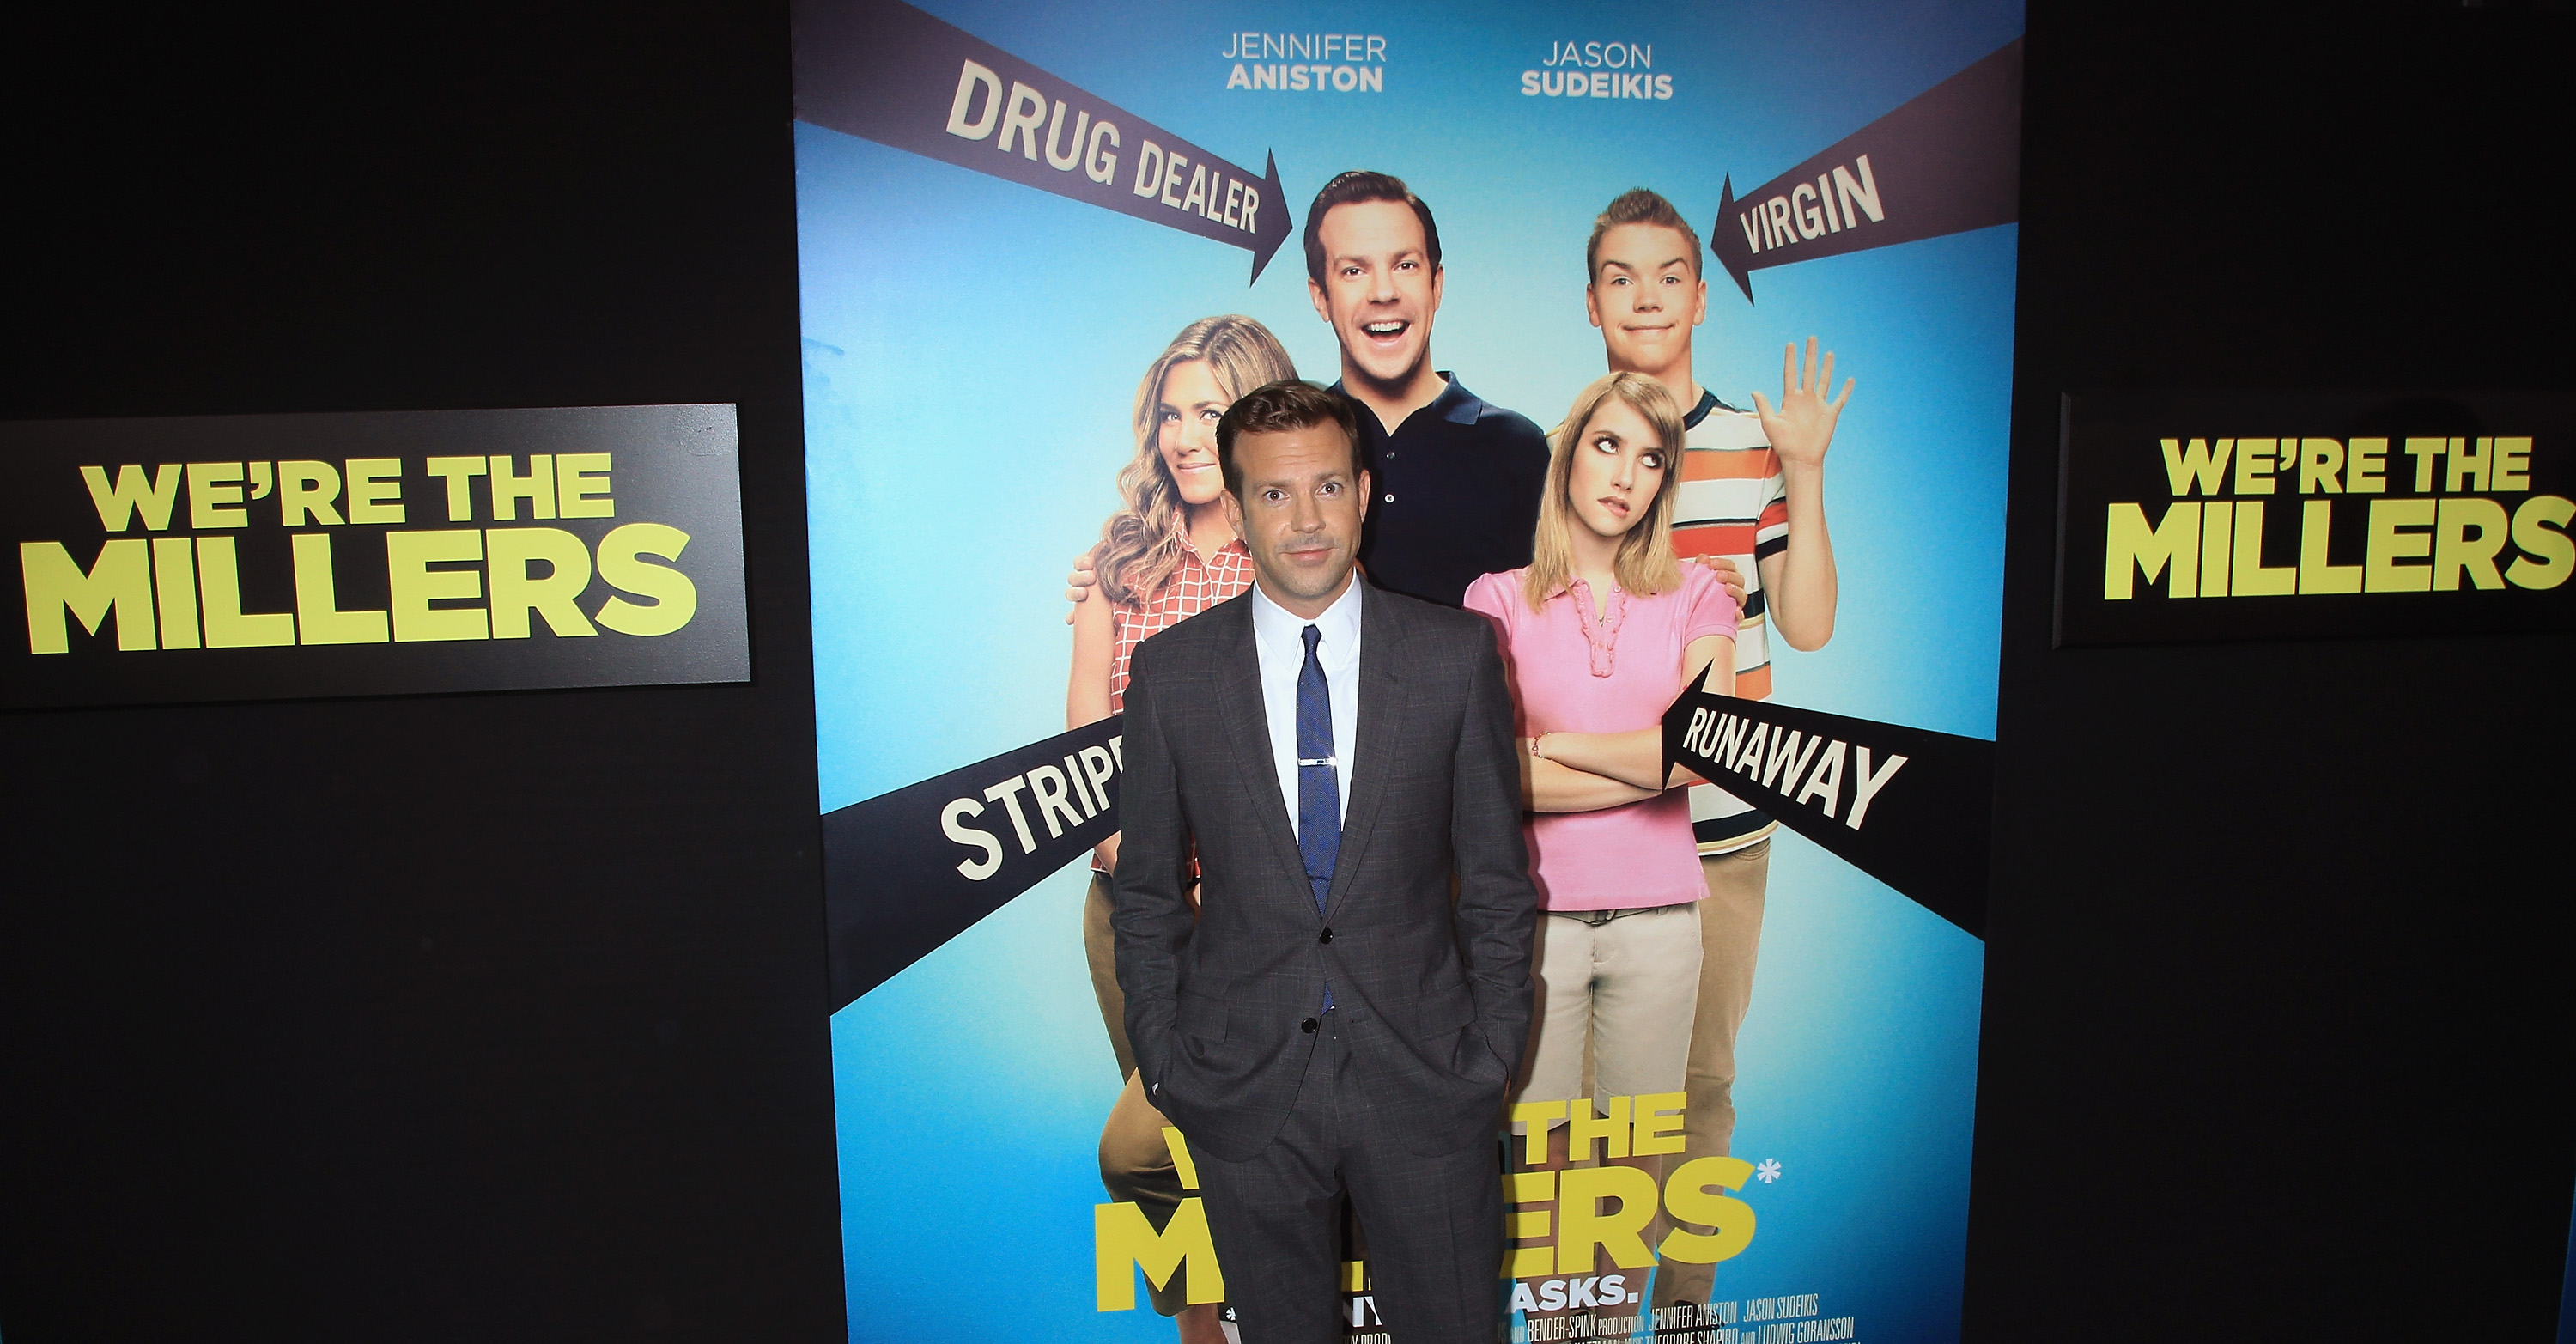 Actor Jason Sudeikis attends the "We're The Millers" New York premiere at Ziegfeld Theater on August 1, 2013, in New York City. | Source: Getty Images